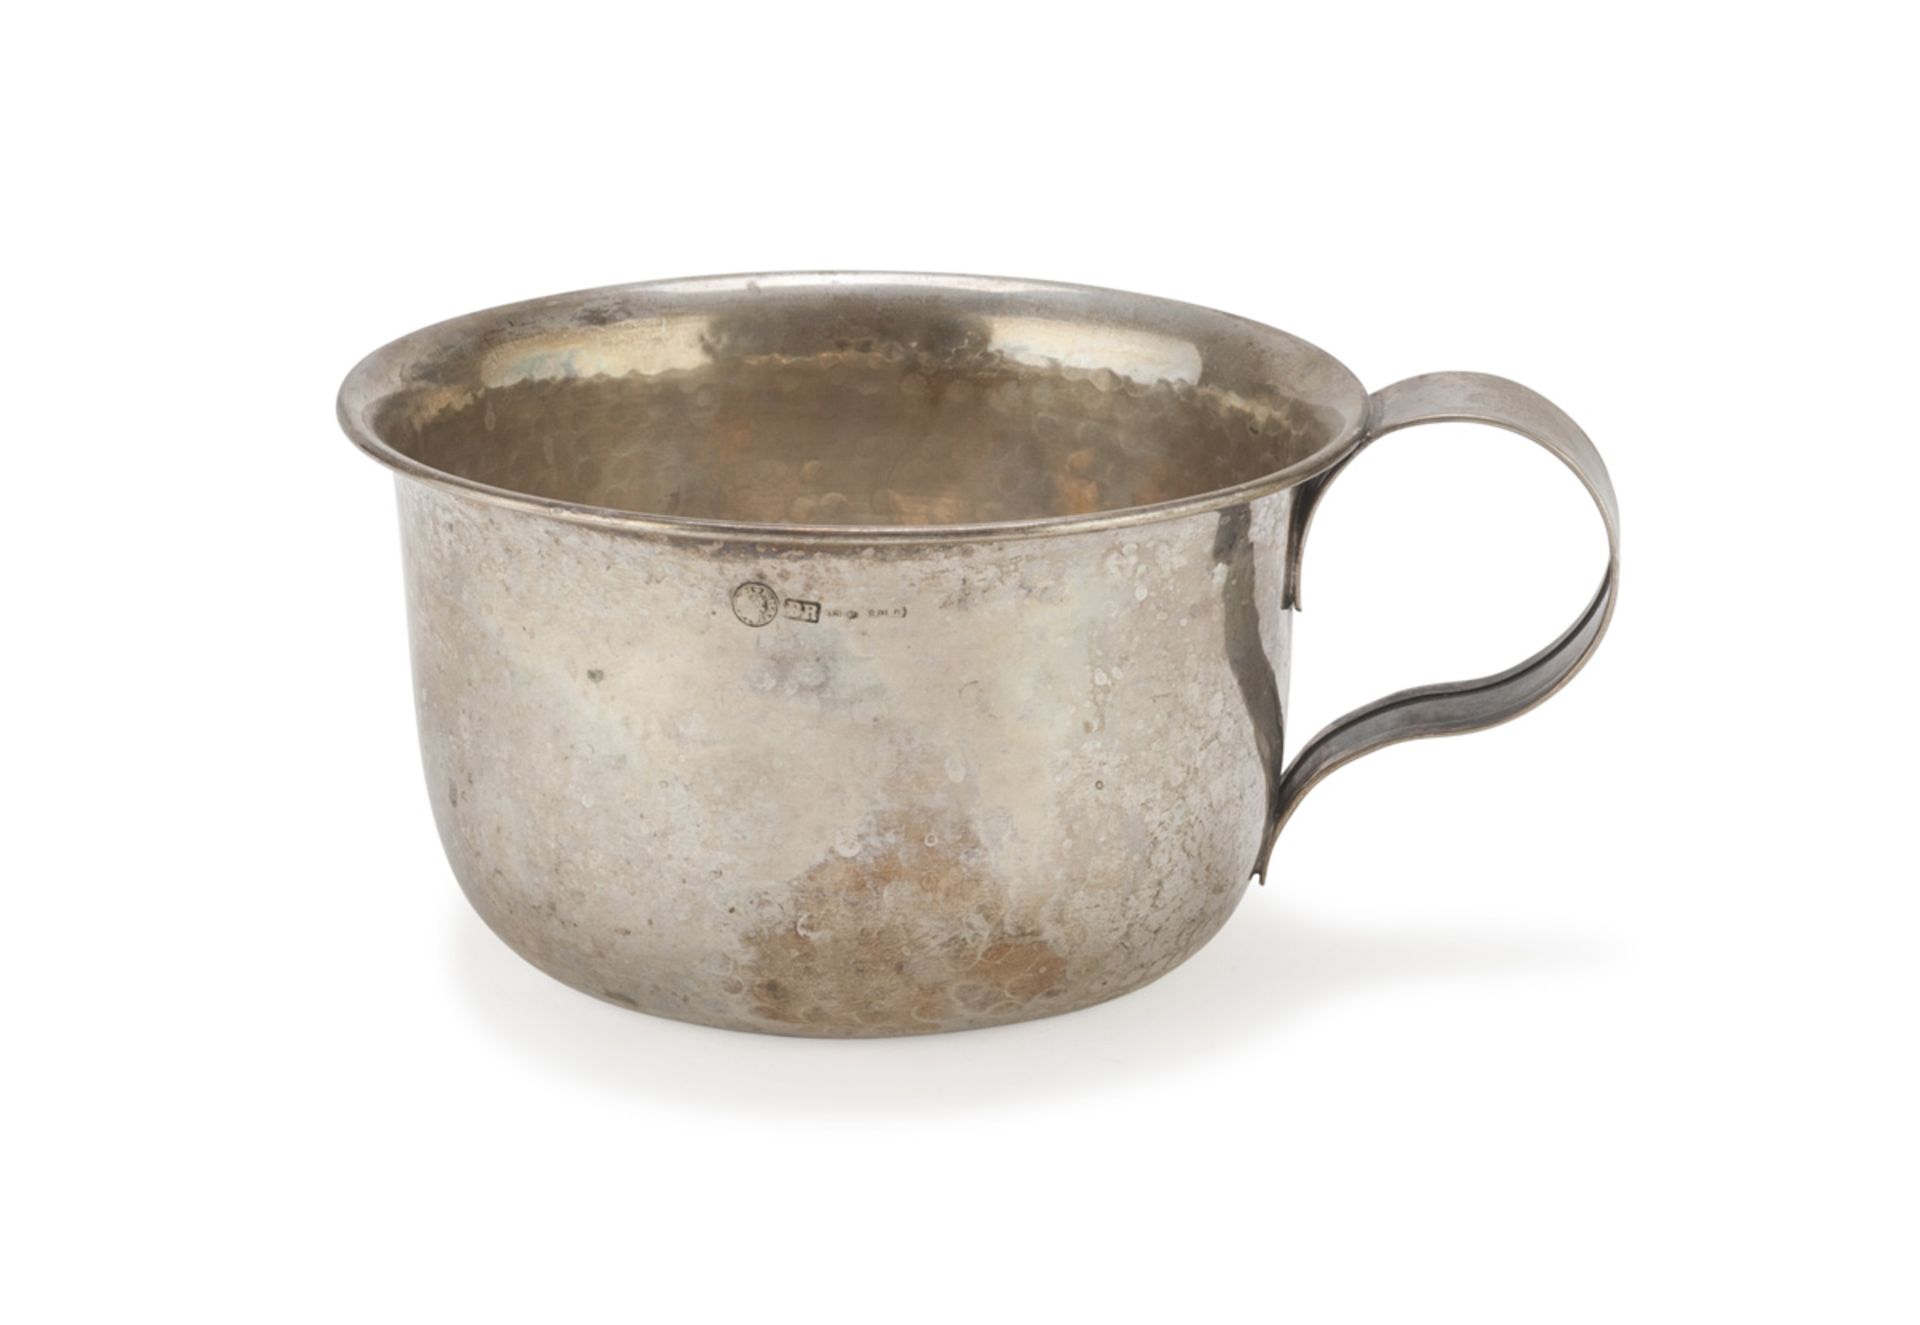 LITTLE POT IN SILVER, PUNCH FLORENCE POST 1968 hammered body with ribbon handle. Silversmith